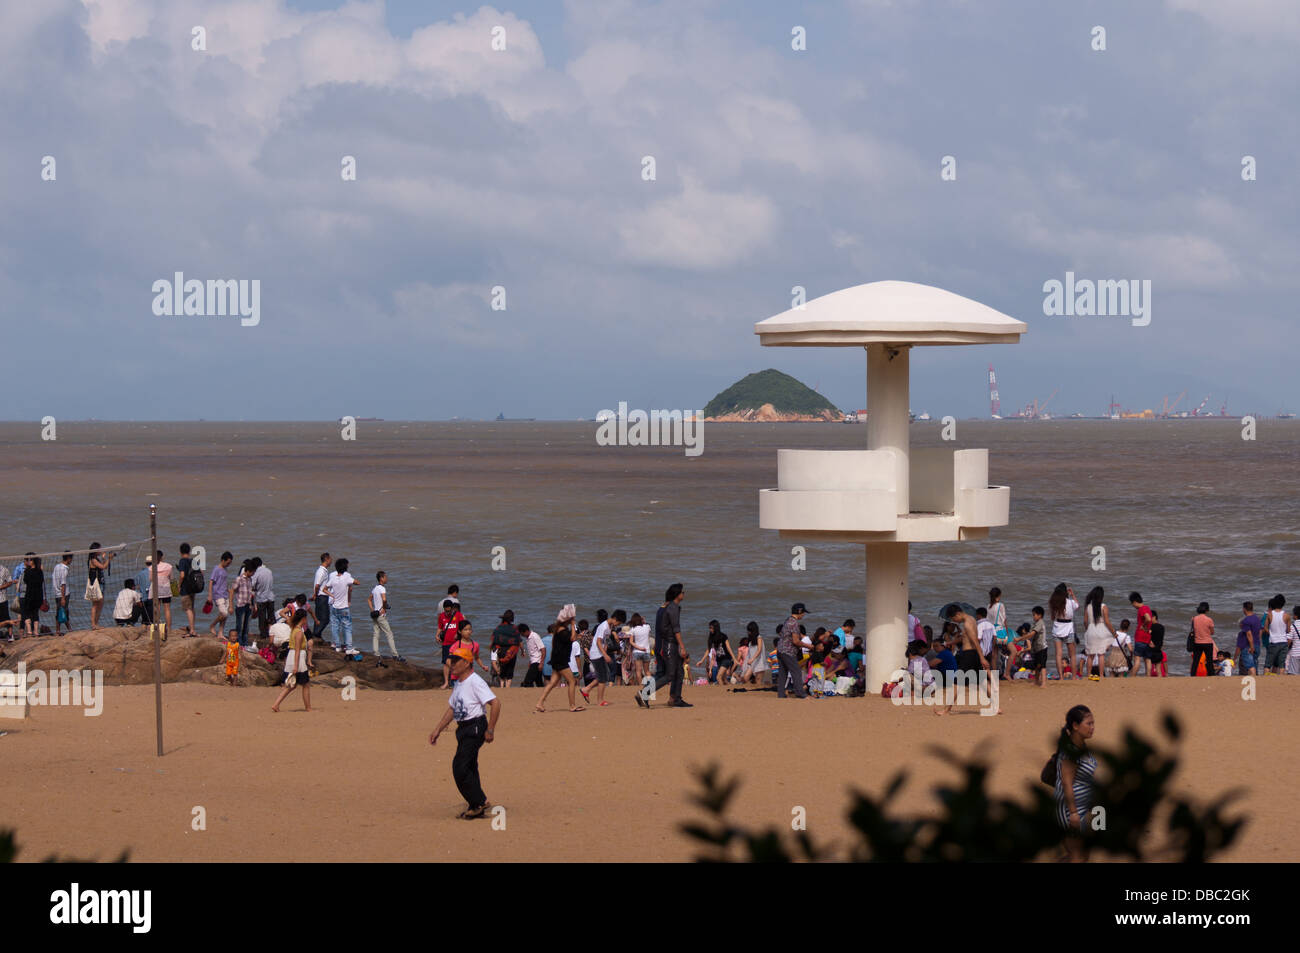 Crowd people at hot summer swimming at the beach in Zhuhai, China Stock Photo